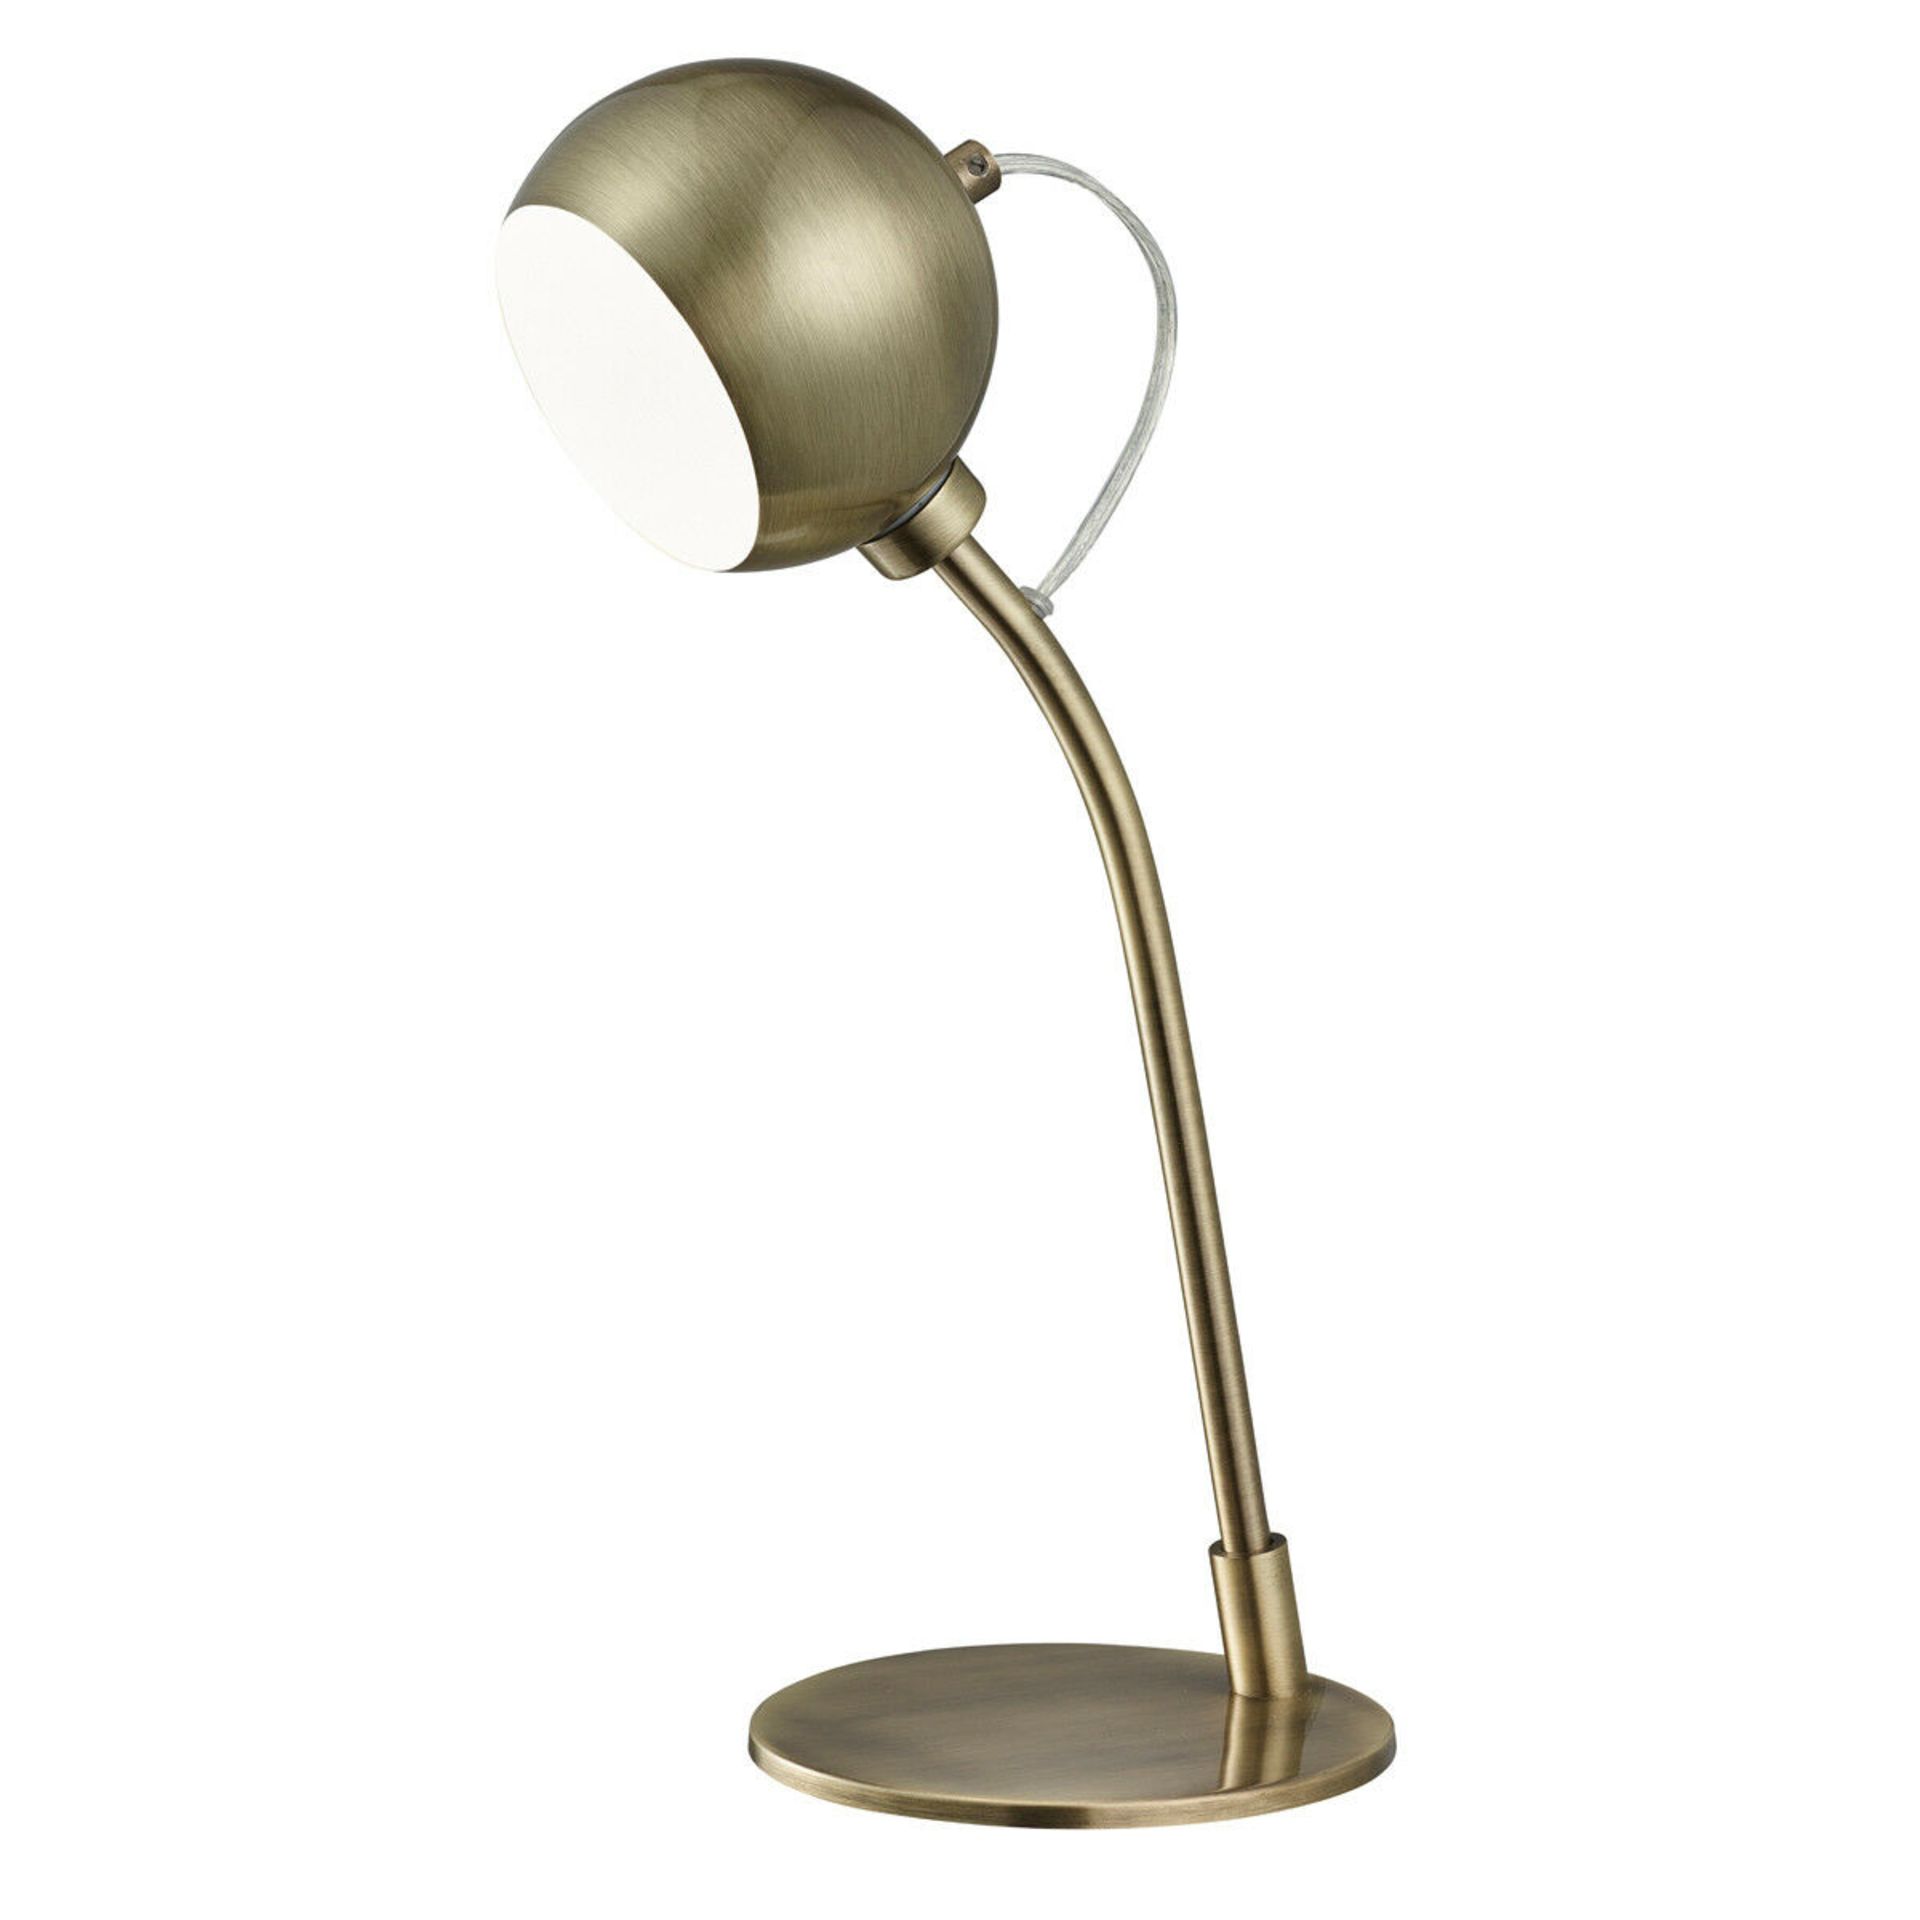 1 x Searchlight Magnetic Head Adjustable LED Table Lamp in Antique Brass- Switched - Brand New and - Image 2 of 2